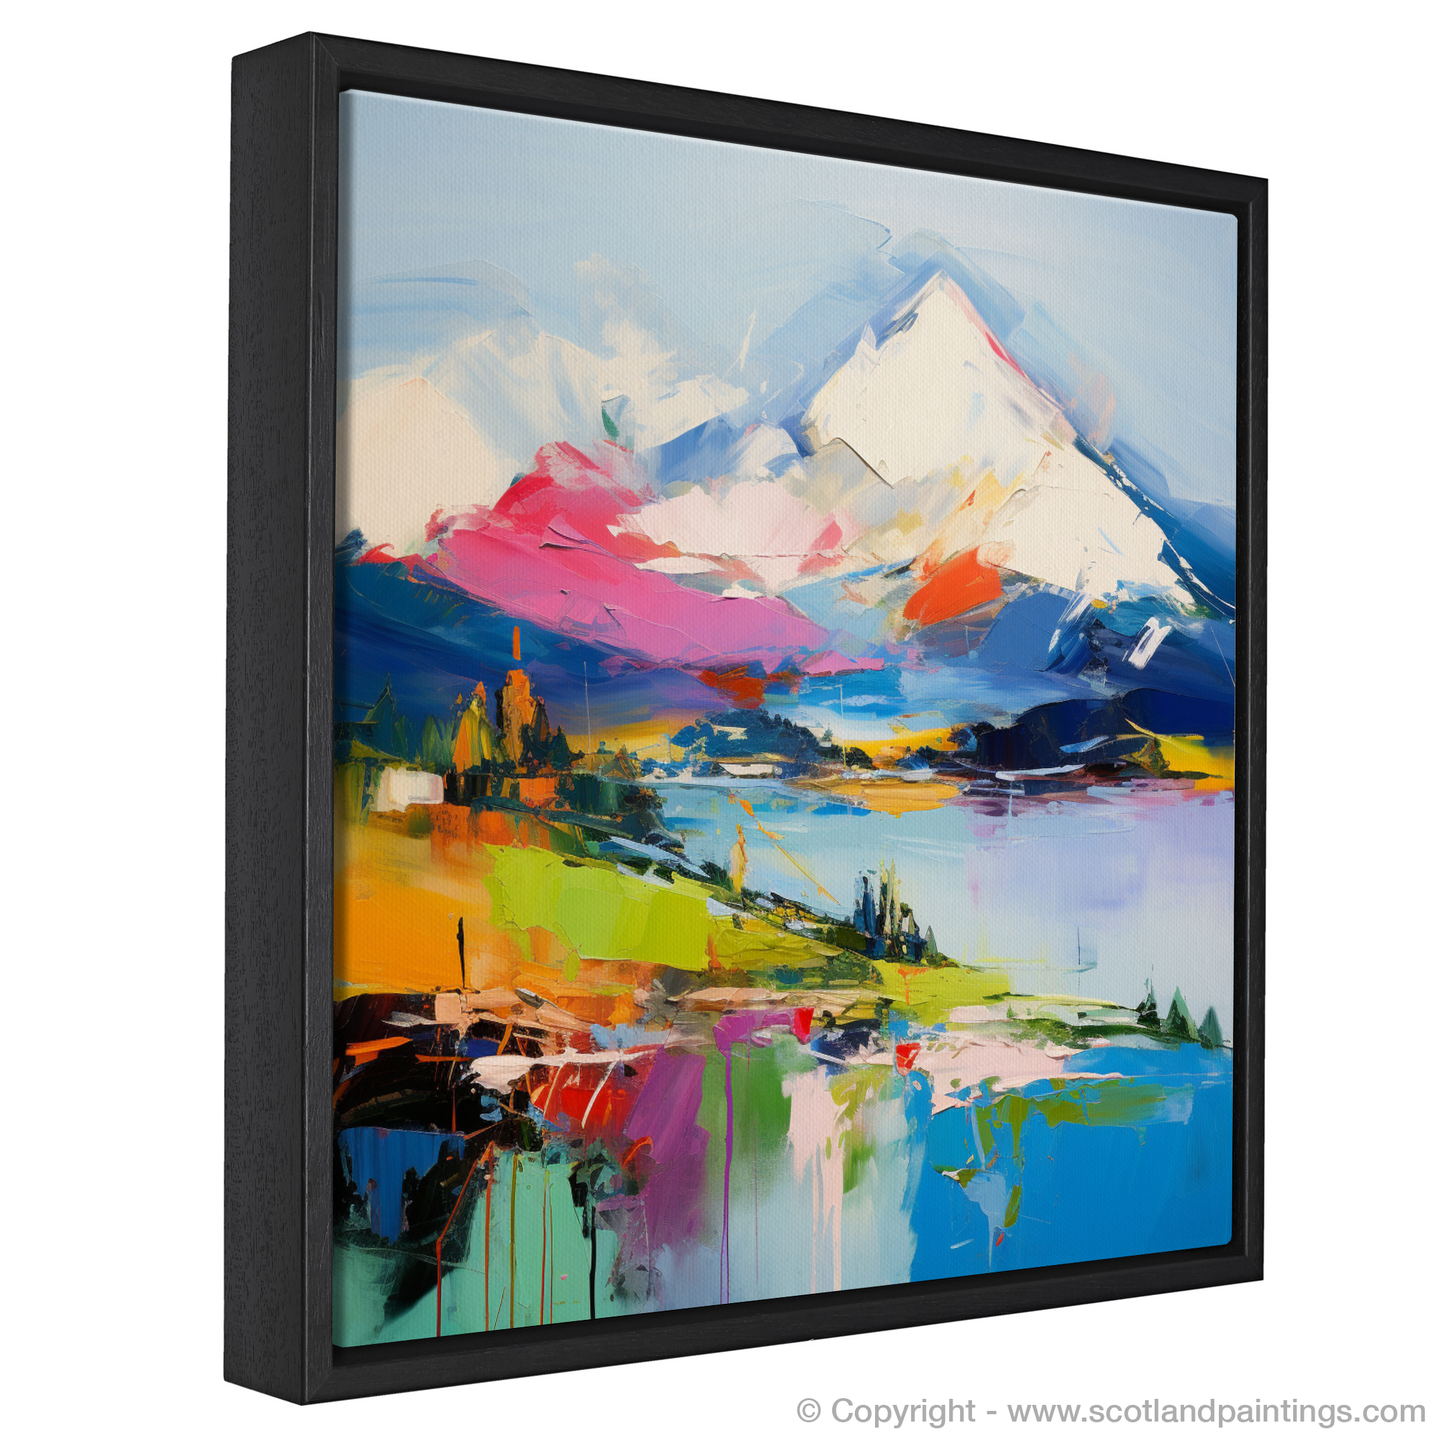 Painting and Art Print of Snow-capped peaks overlooking Loch Lomond entitled "Snow-Capped Majesty: An Abstract Impression of Loch Lomond".